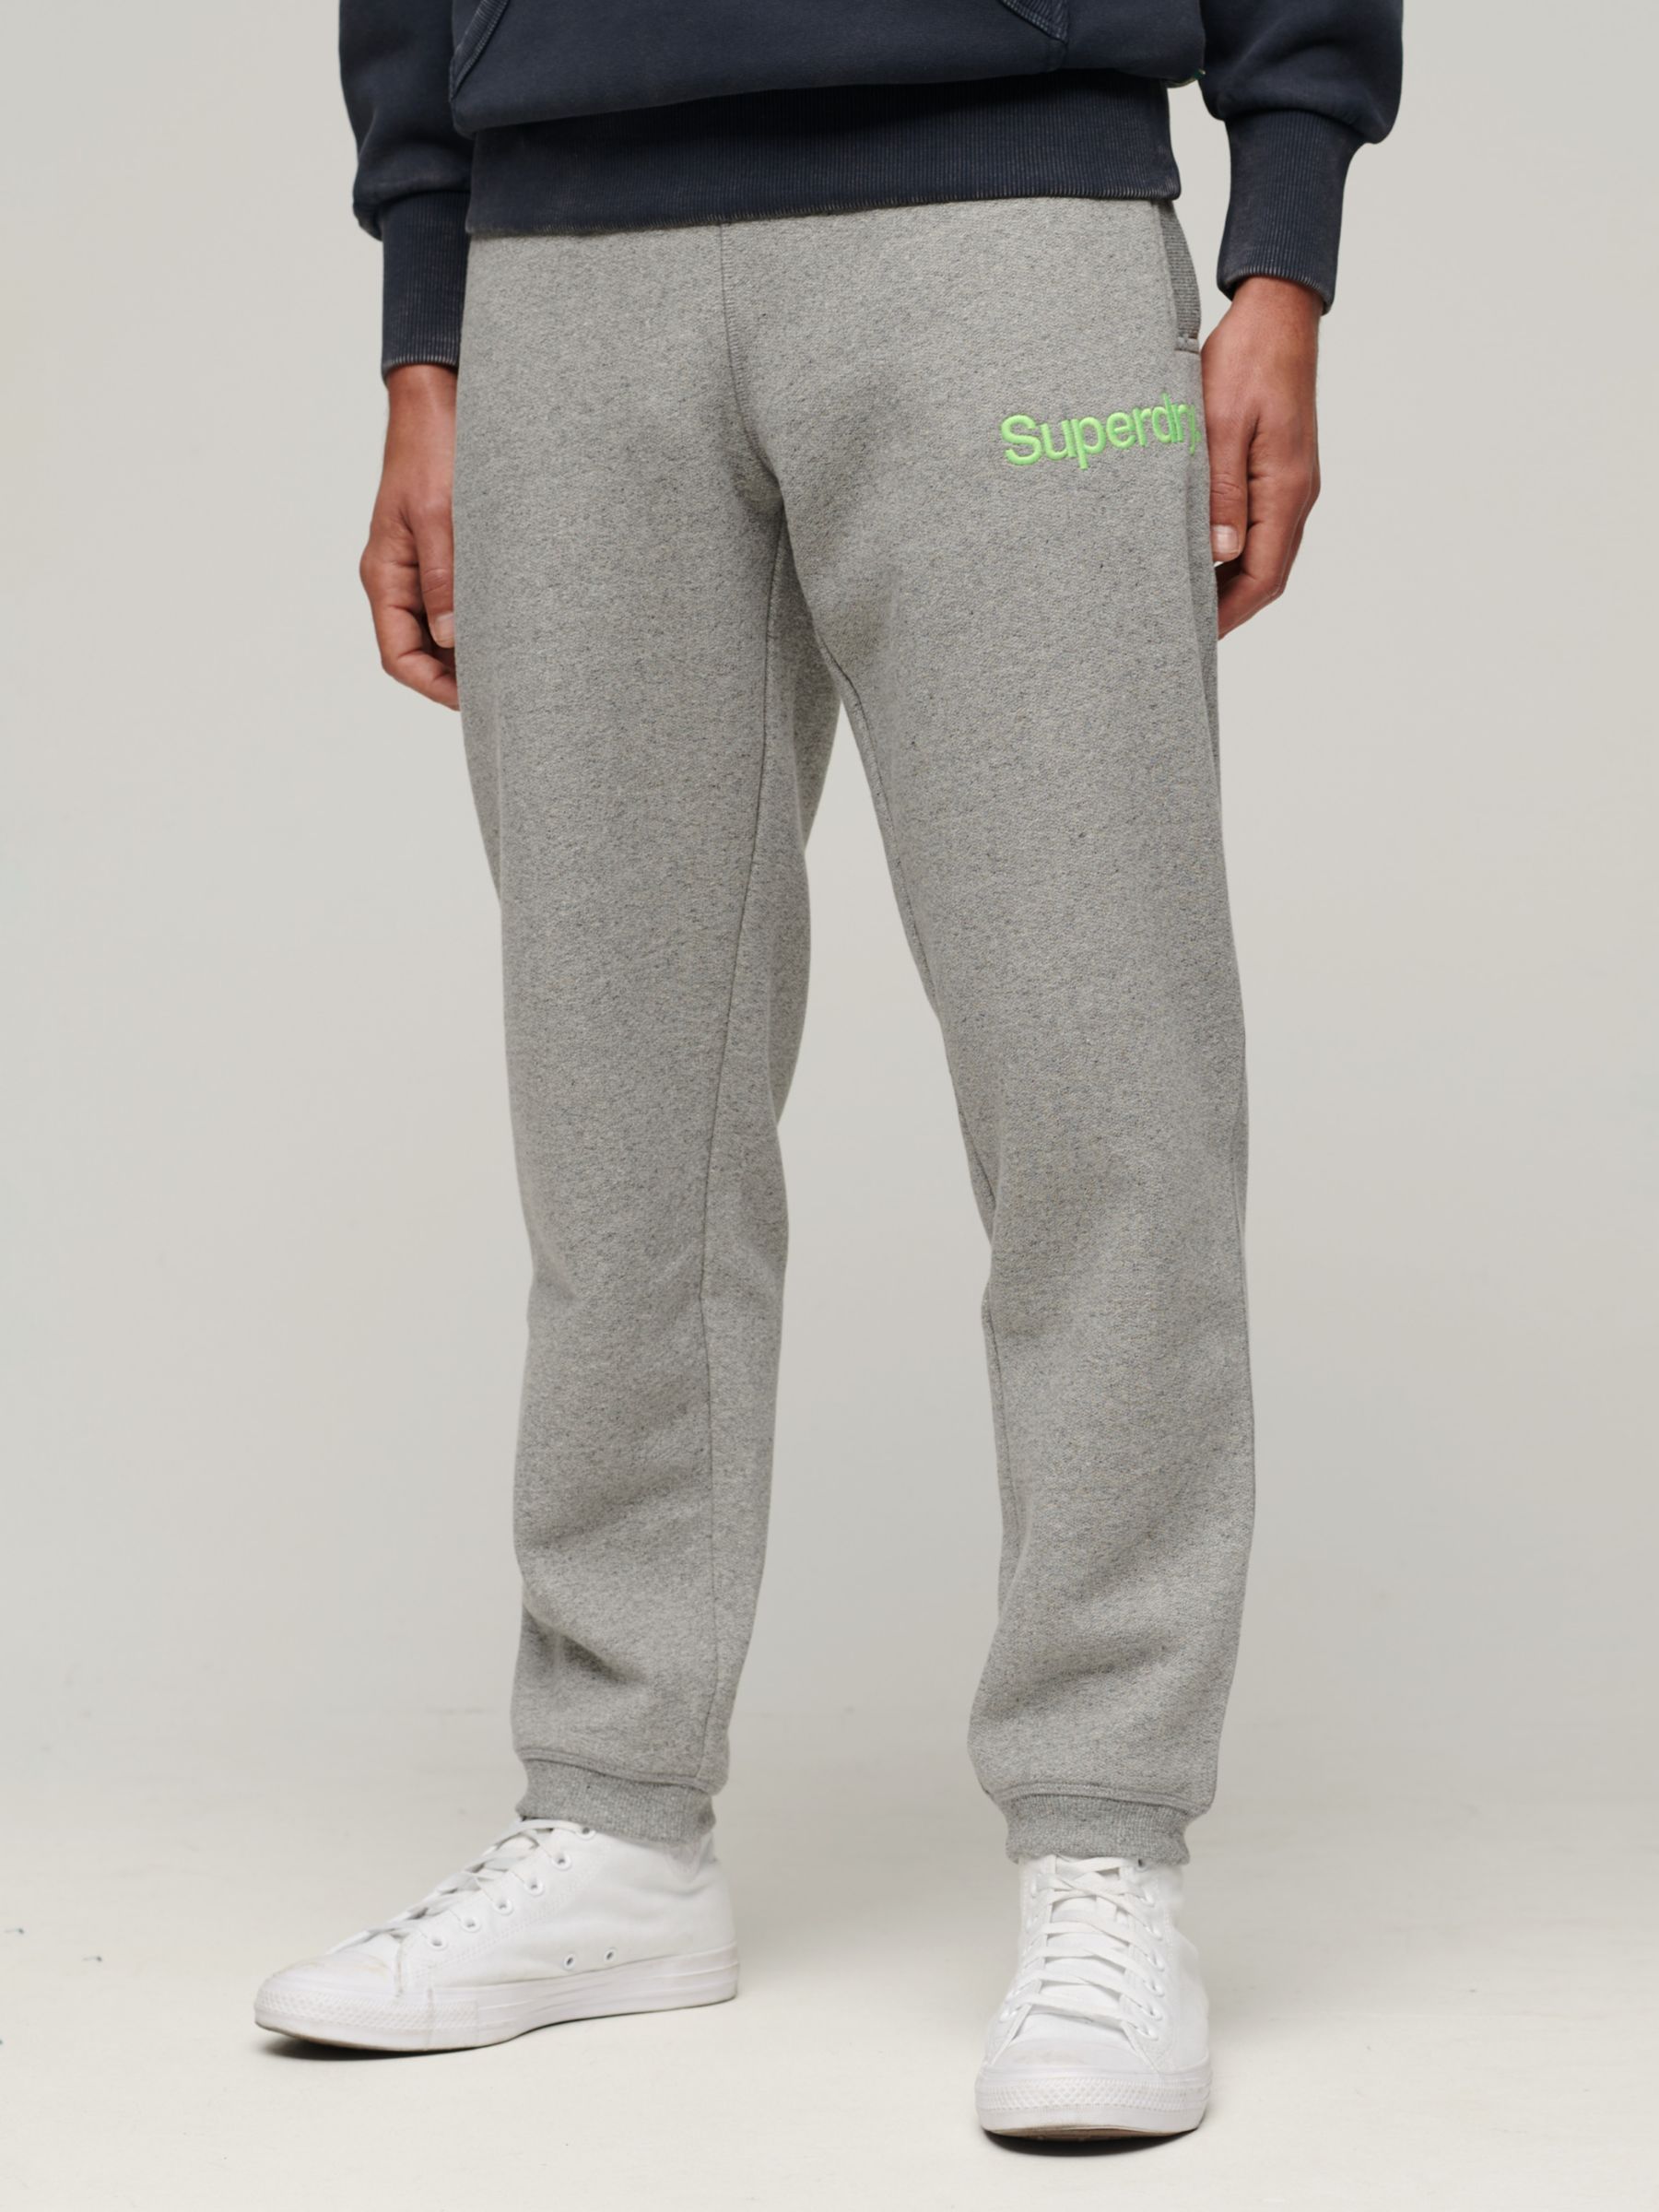 Buy Superdry Cor Logo Classic Wash Joggers, True Grit Online at johnlewis.com